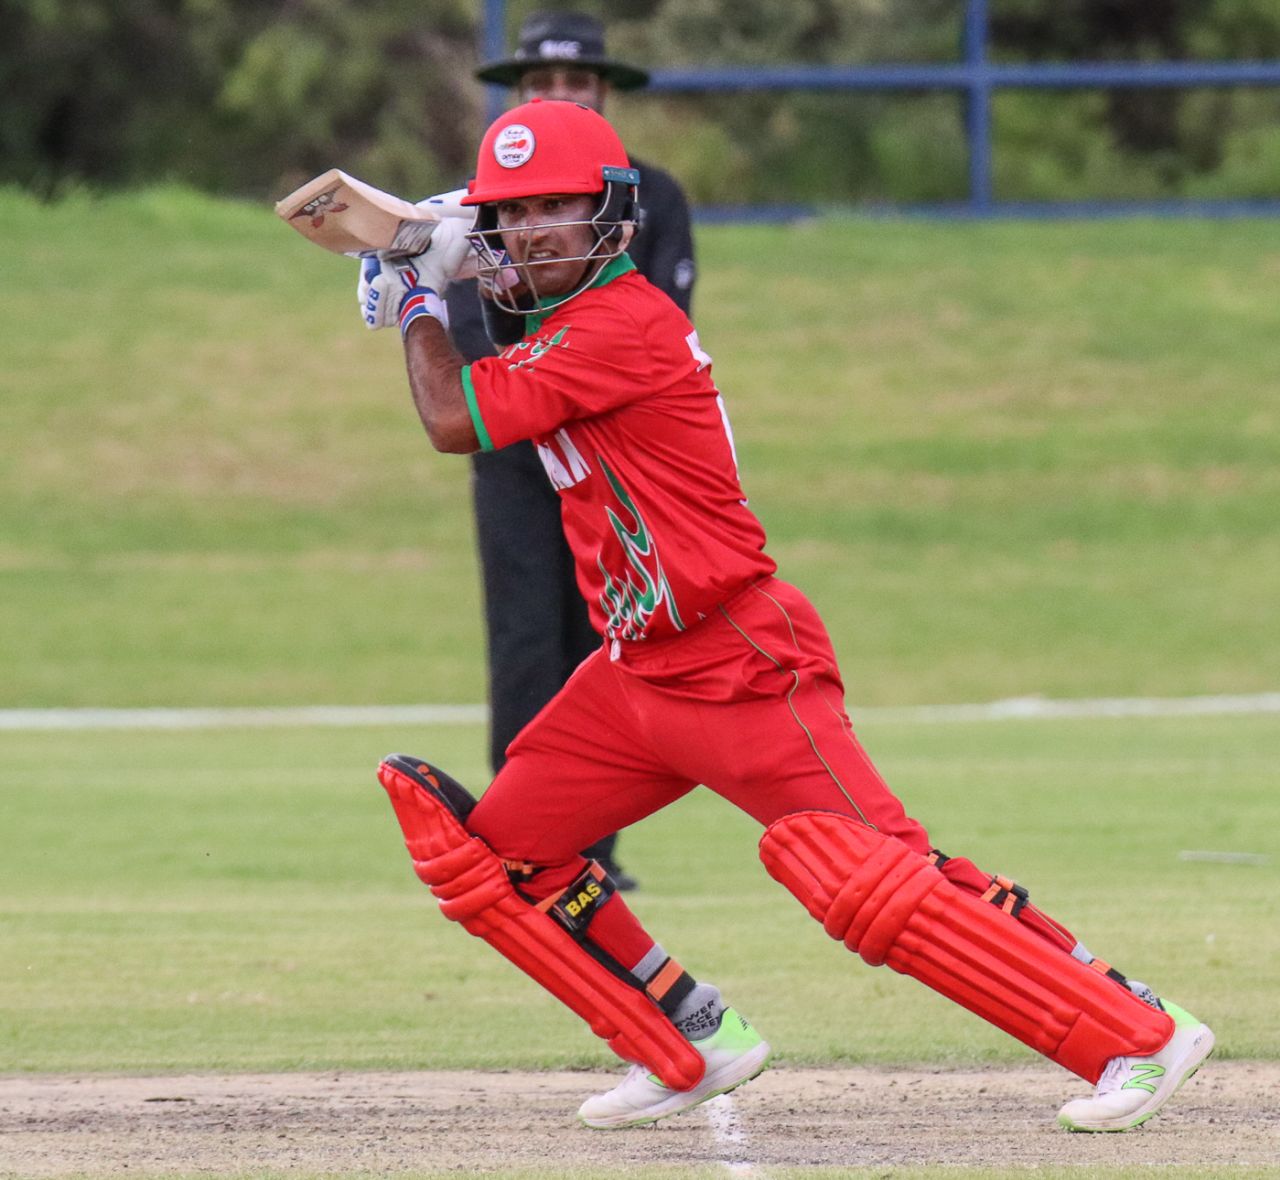 Vaibhav Wategaonkar drives through the off side during his unbeaten knock, Nepal v Oman, ICC World Cricket League Division Two, Windhoek, February 9, 2018